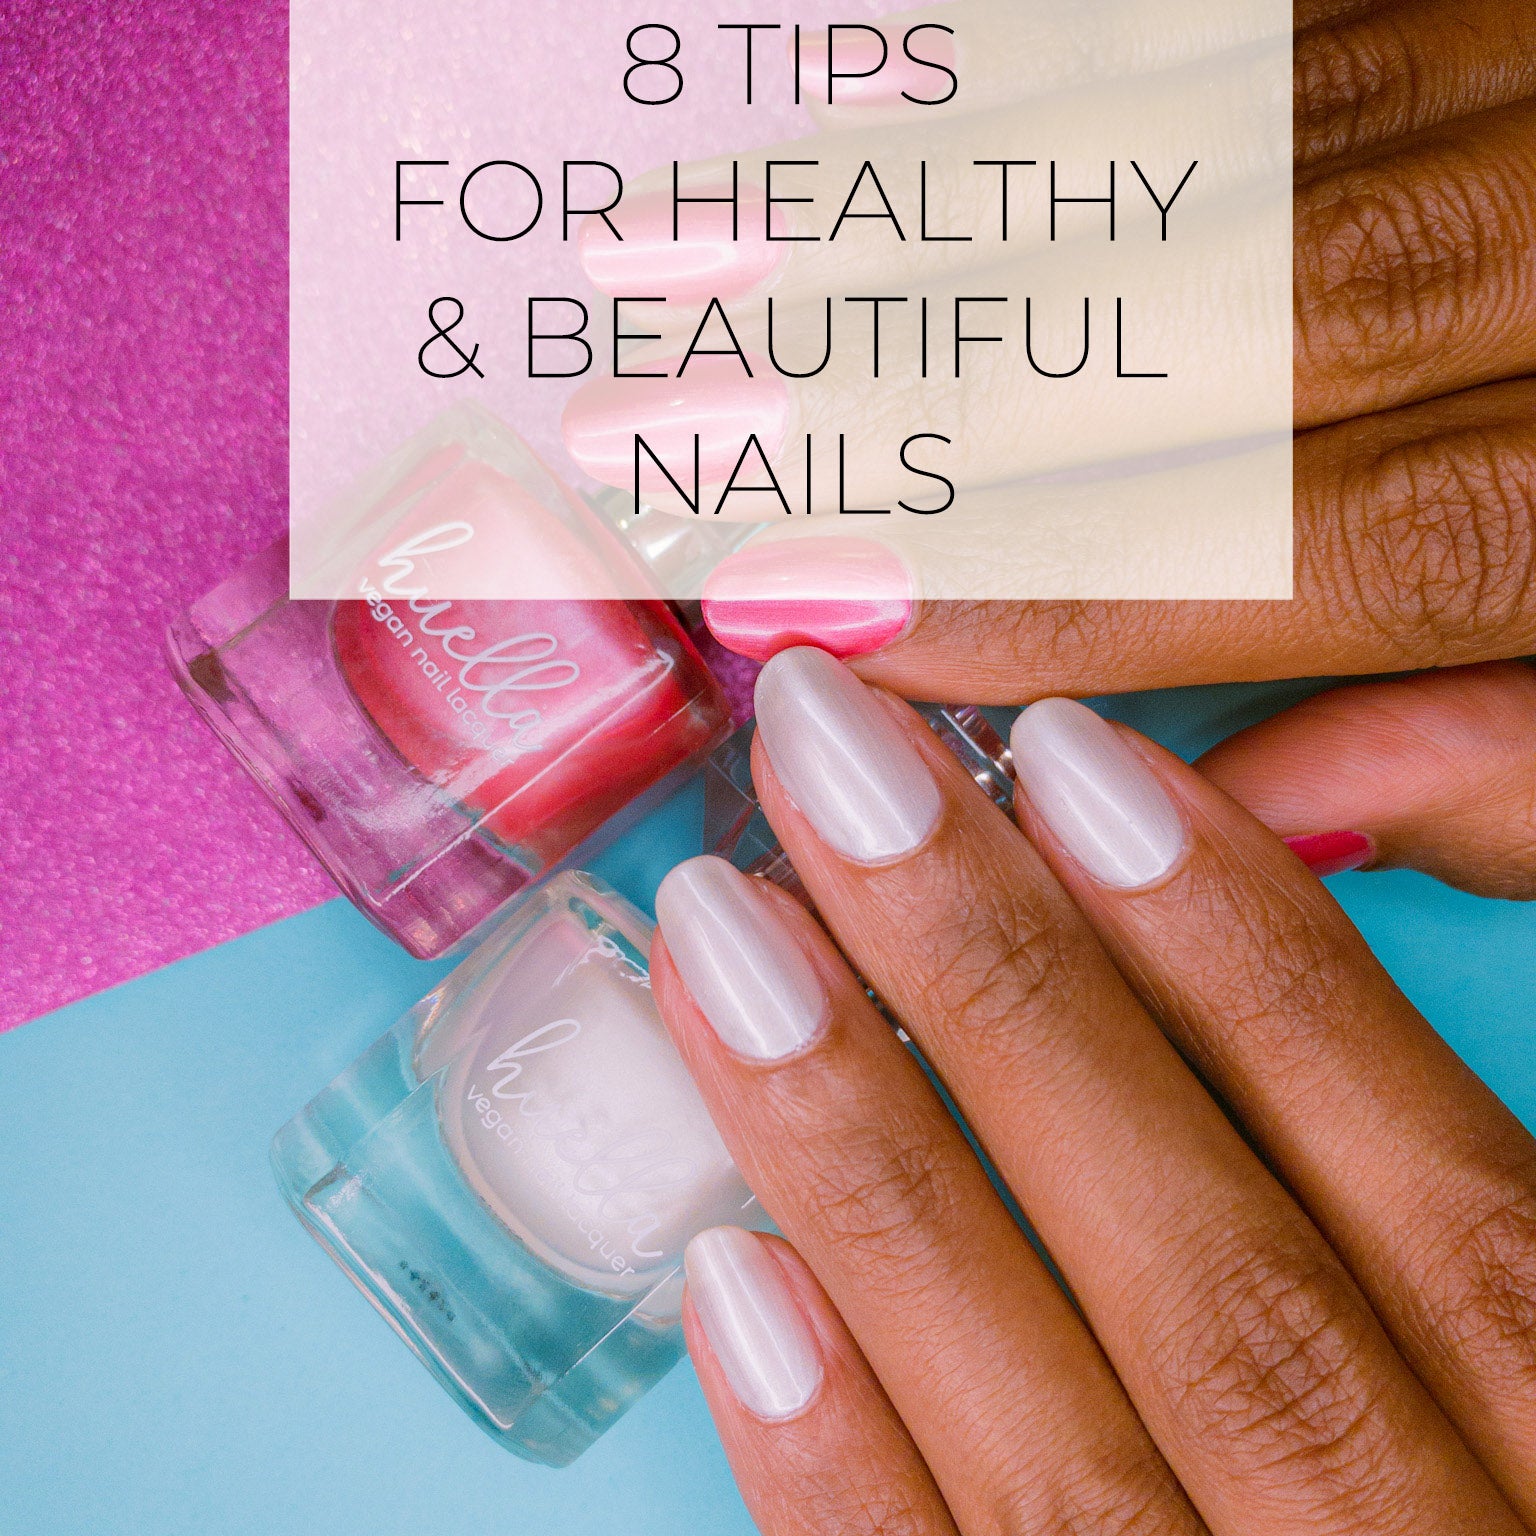 8 Tips for Healthy and Beautiful Nails